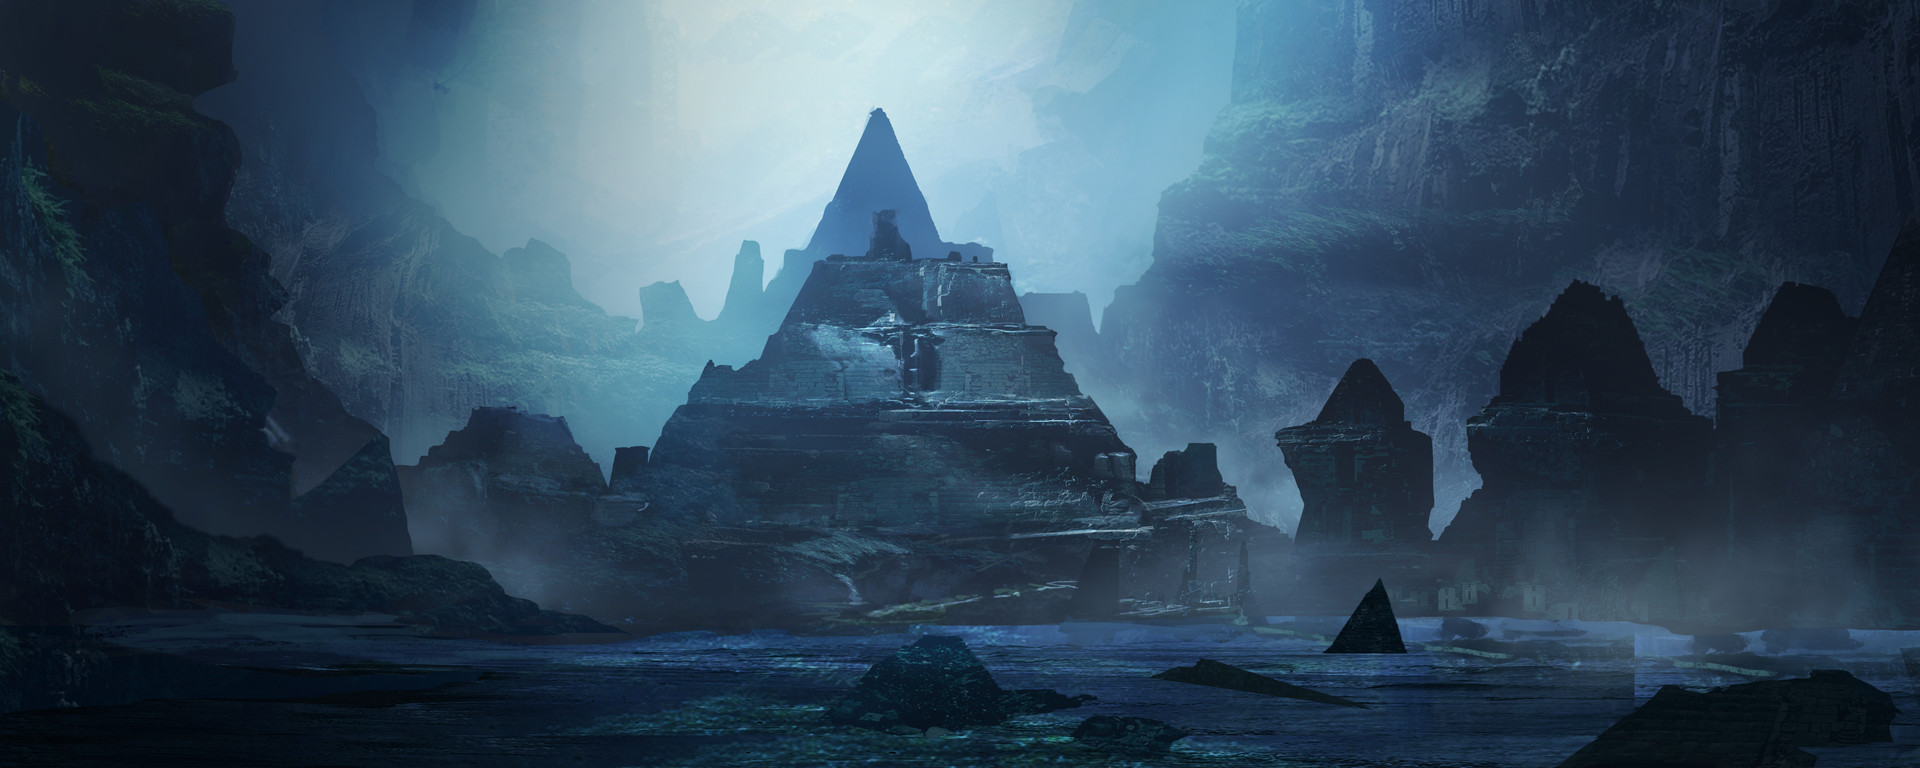 ArtStation - The Drowned Pyramids